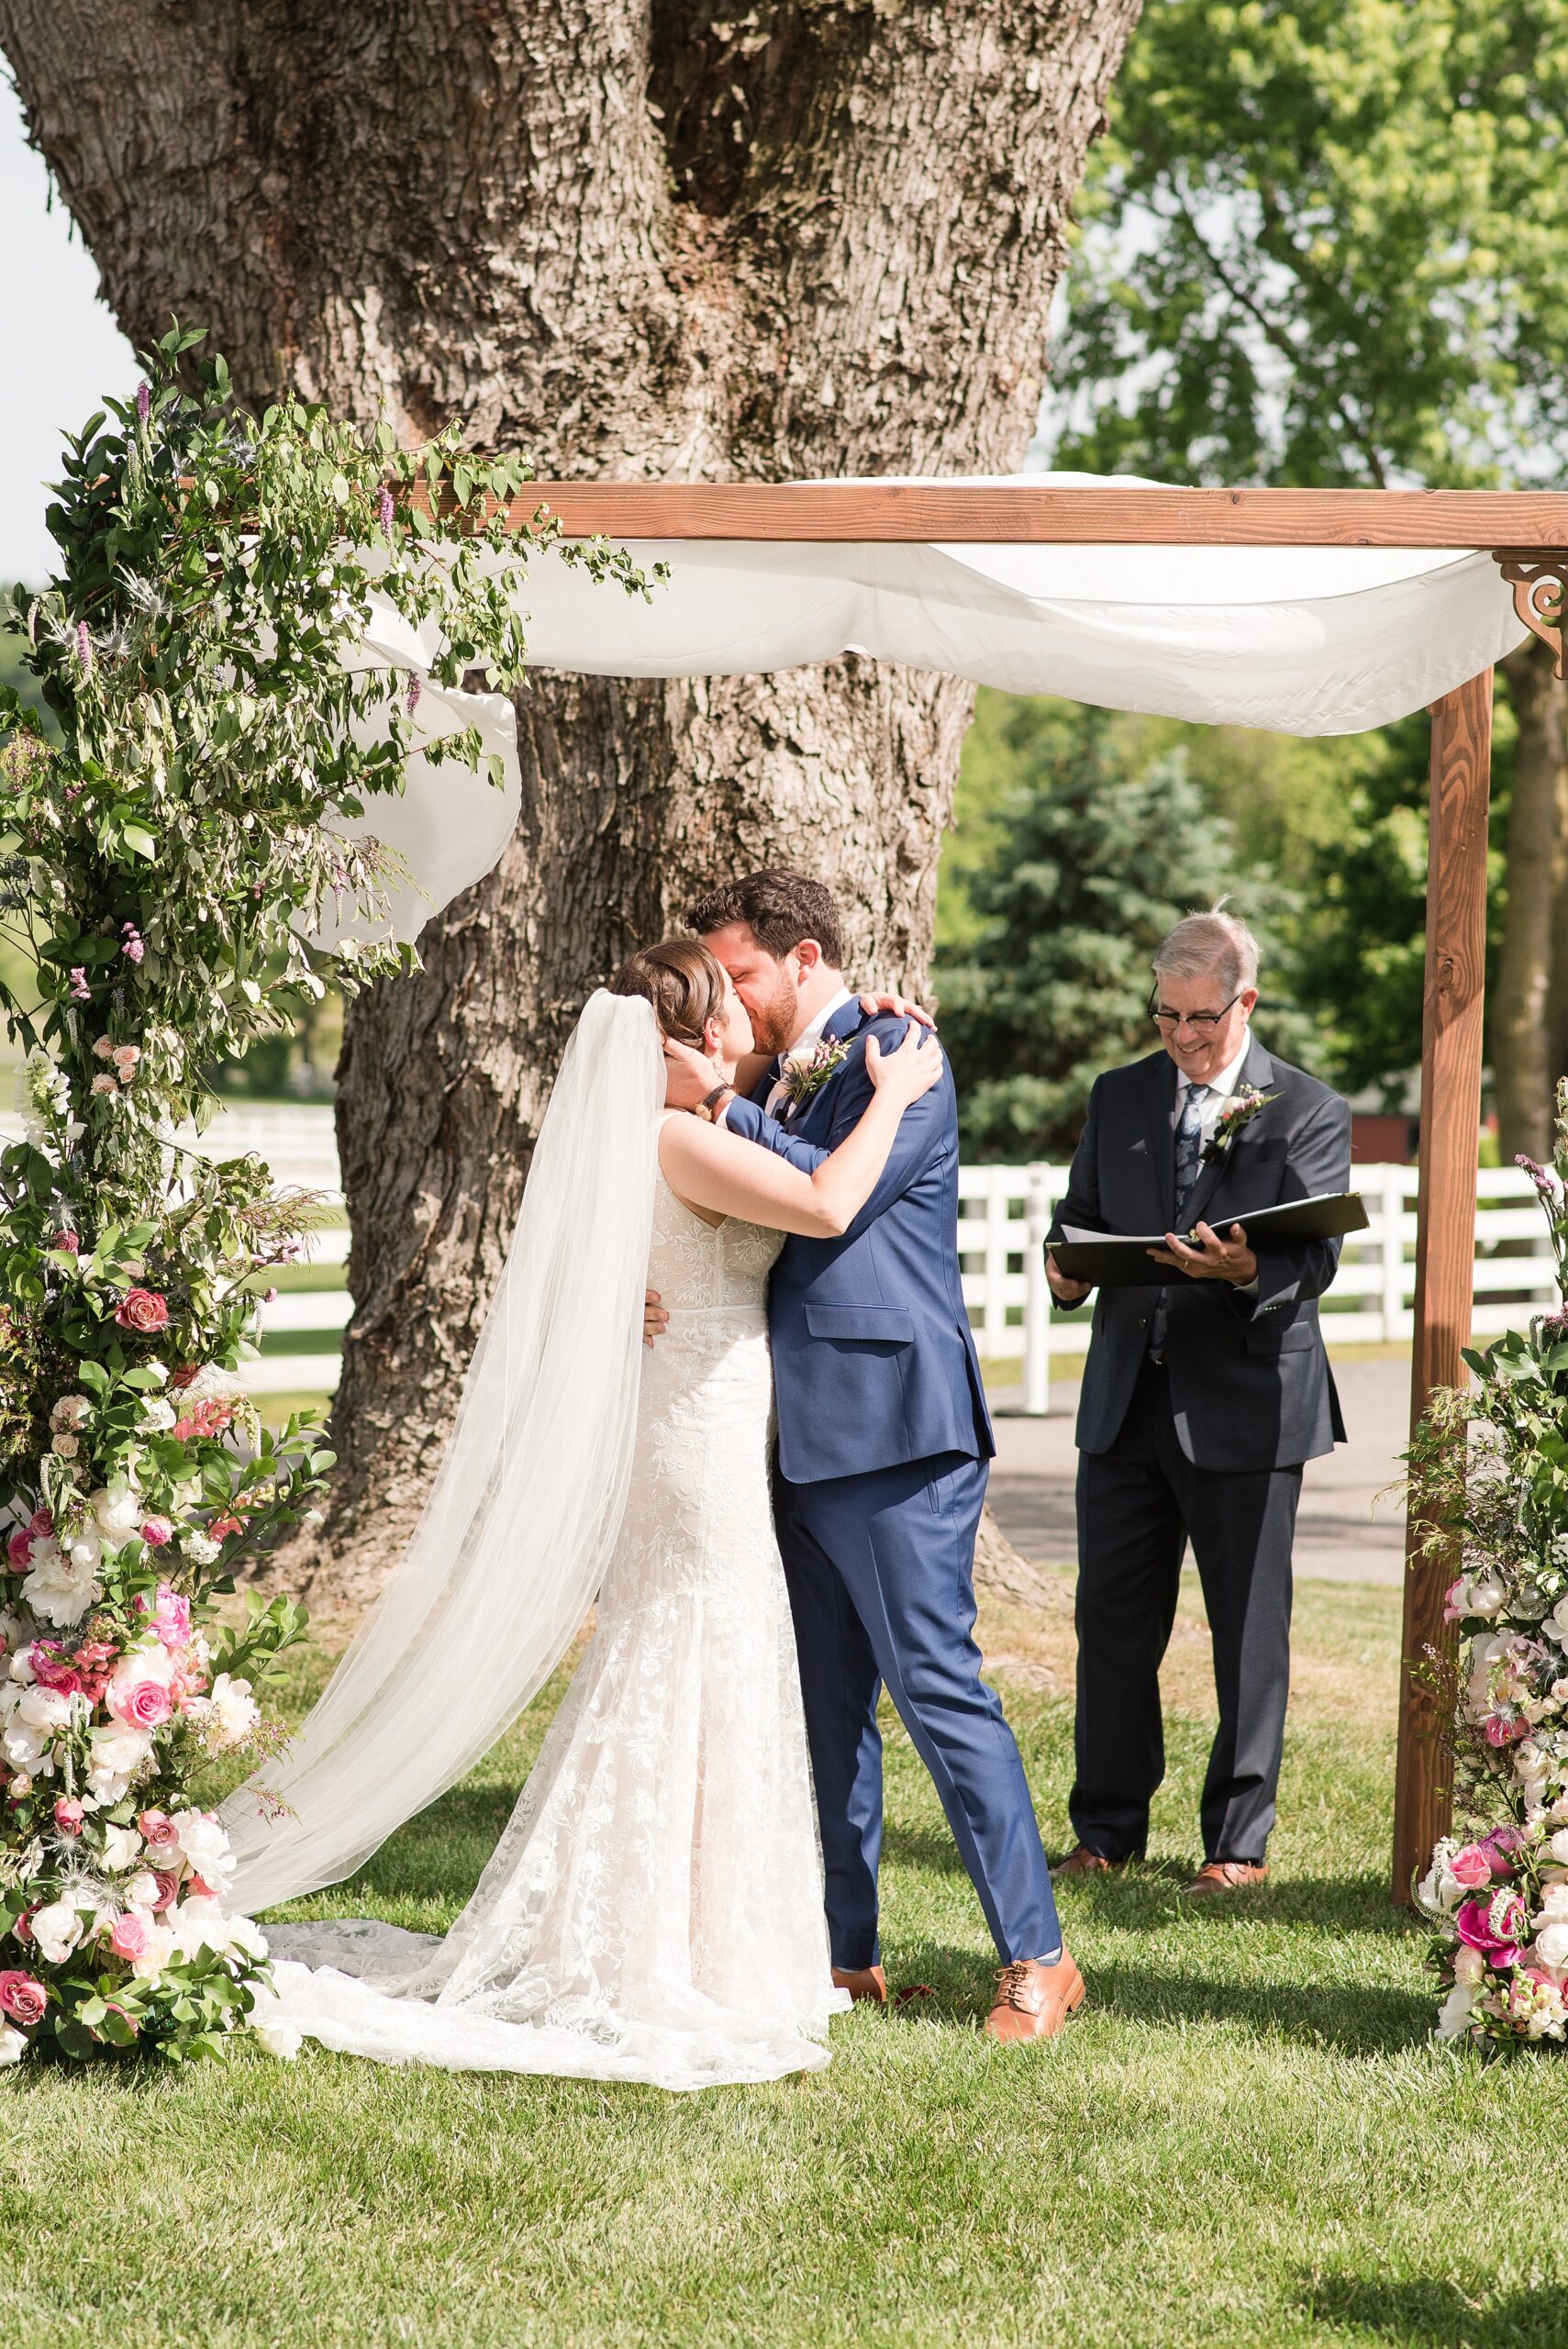 Newlyweds kiss to end their Bluebird Manor wedding ceremony under a wooden arbor covered in flowers